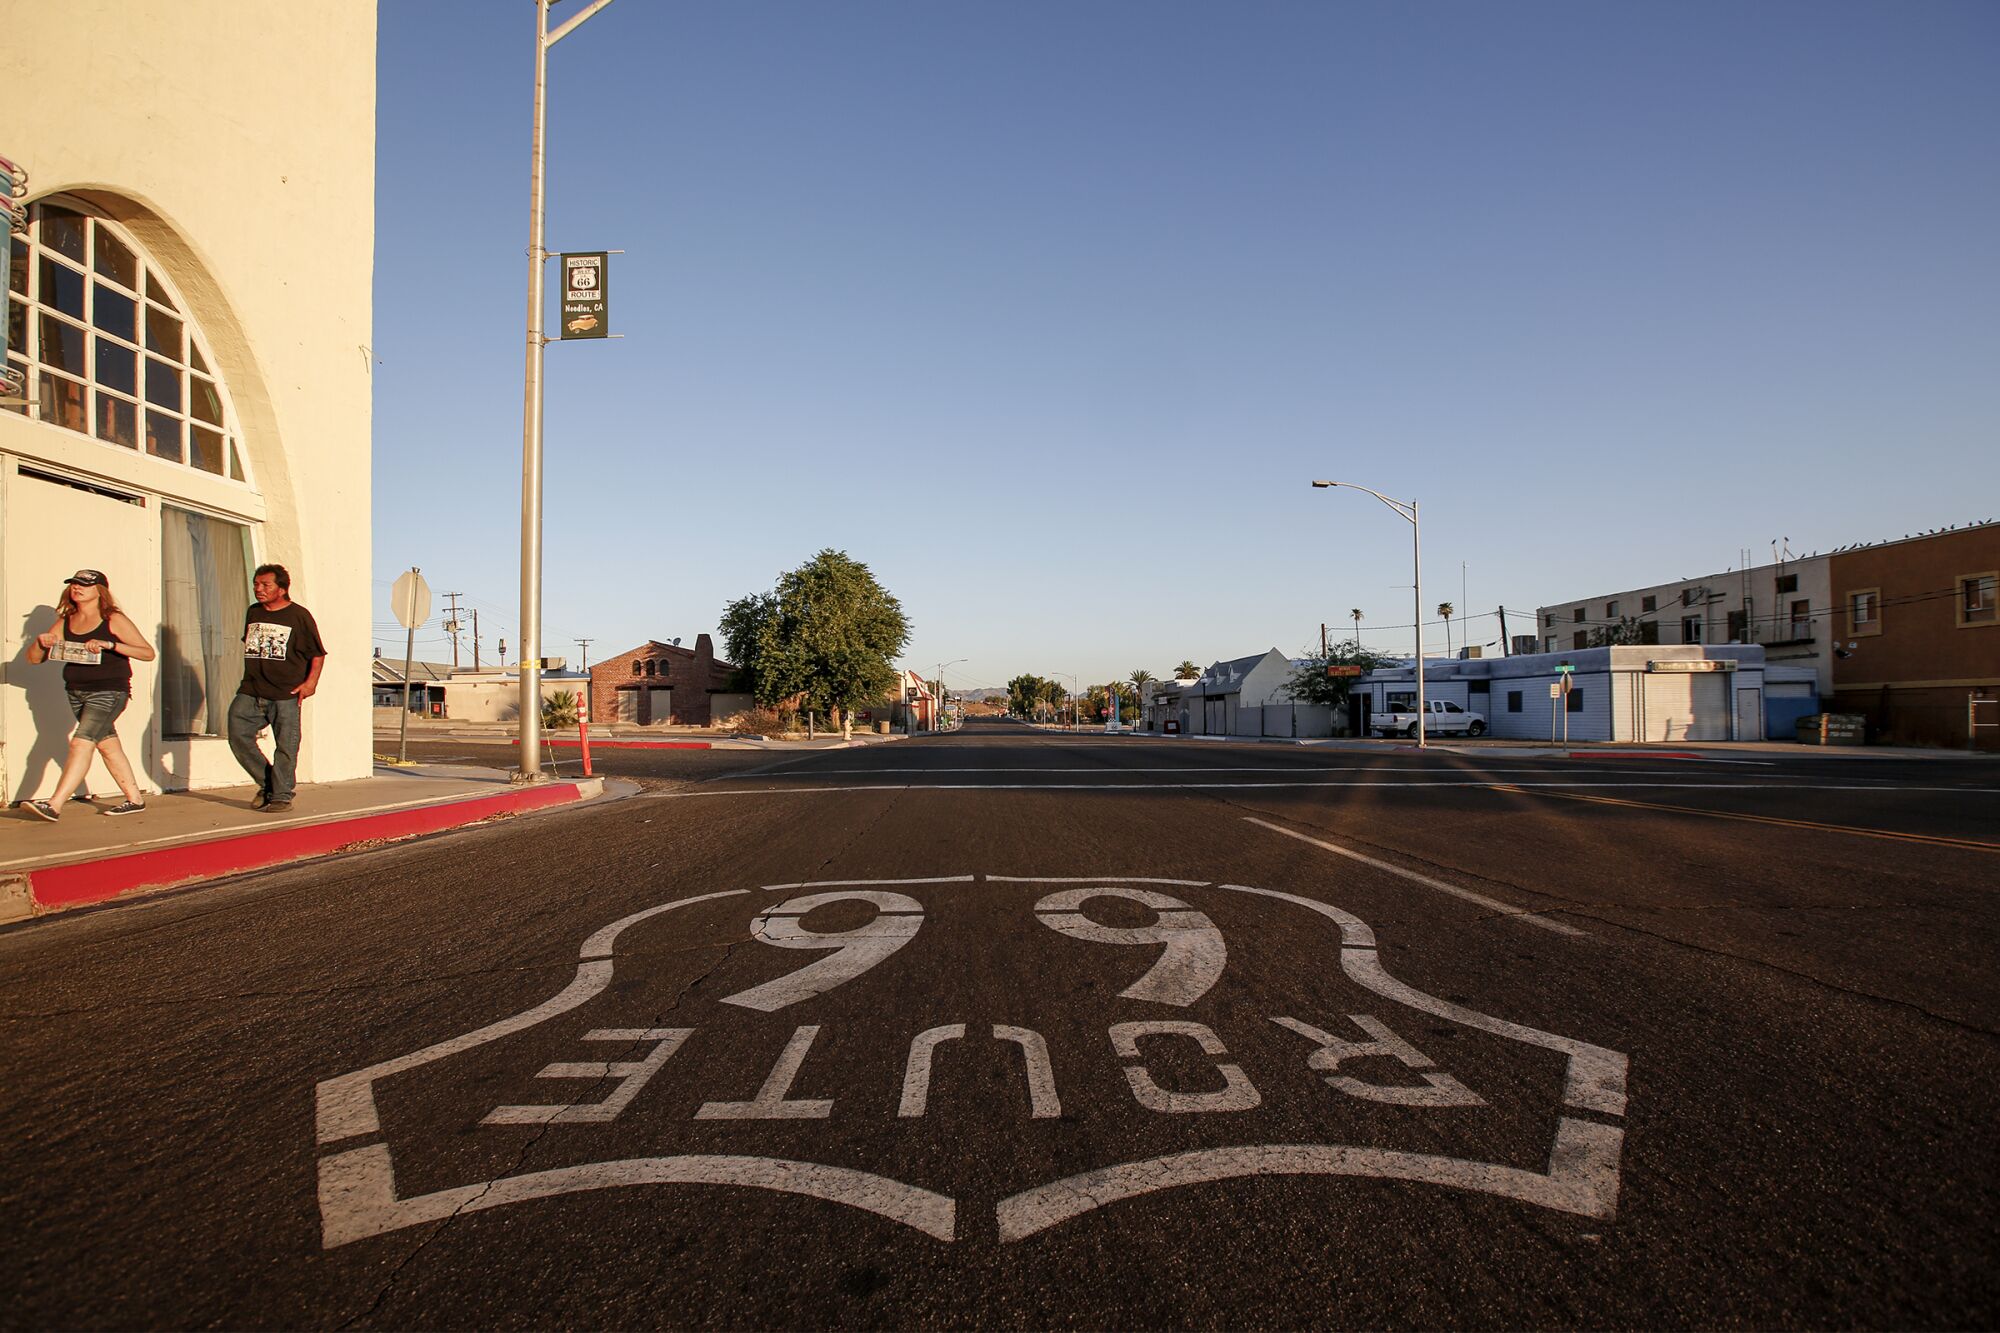 Historic Route 66 goes through the desert town of Needles.